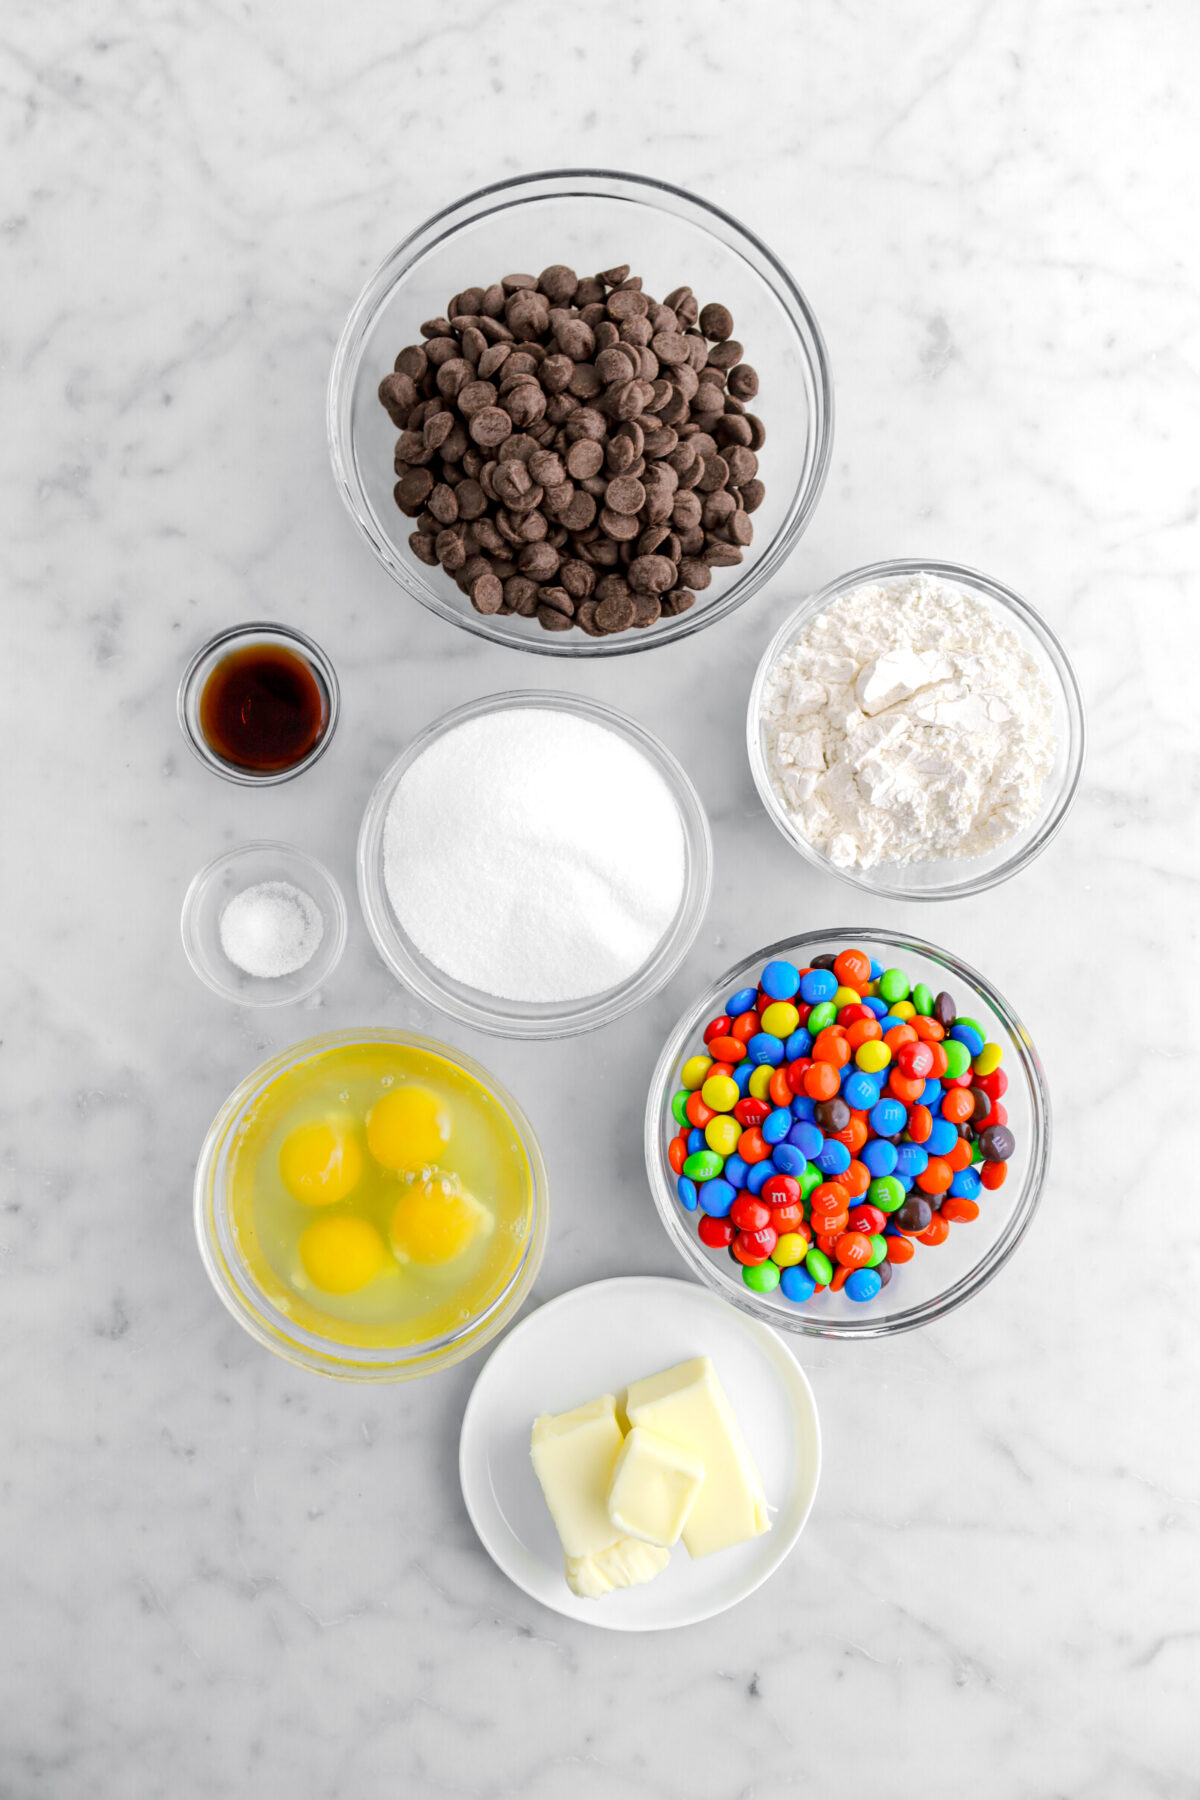 chocolate chips, vanilla, sugar, flour, M&M's, eggs, salt, and butter on marble surface.